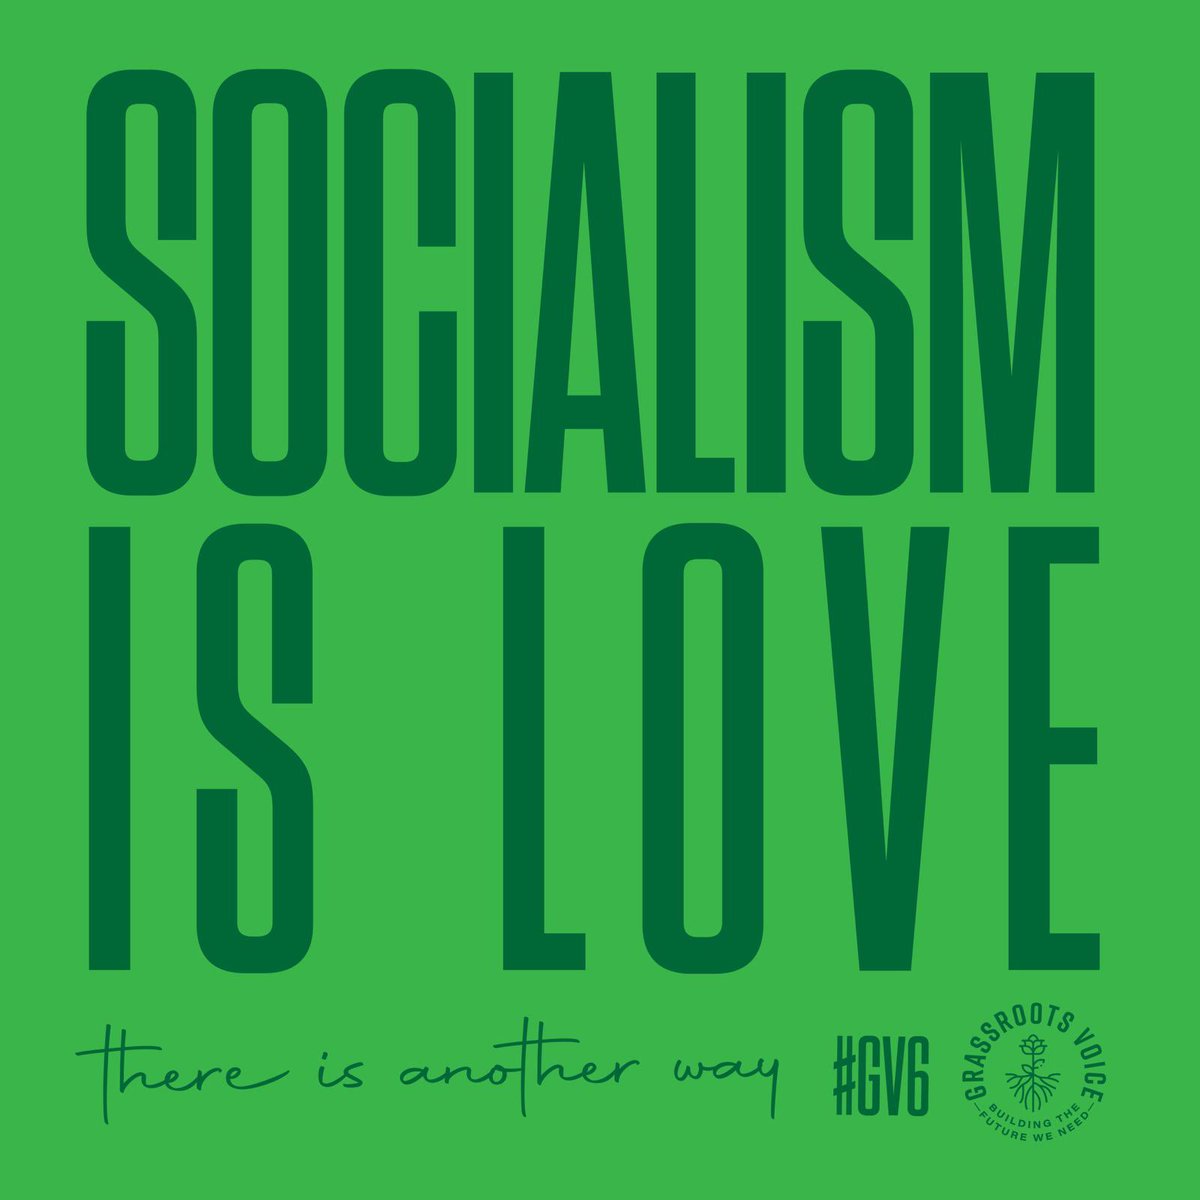 [thread] When our opponents talk about socialism, they either talk about it as though it is some sort of utopian, fantasy idea that can never happen or a dangerous alternative to what we have right now. I just don’t connect with that view at all. (1/8)  #GV6  #GrassrootsVoice